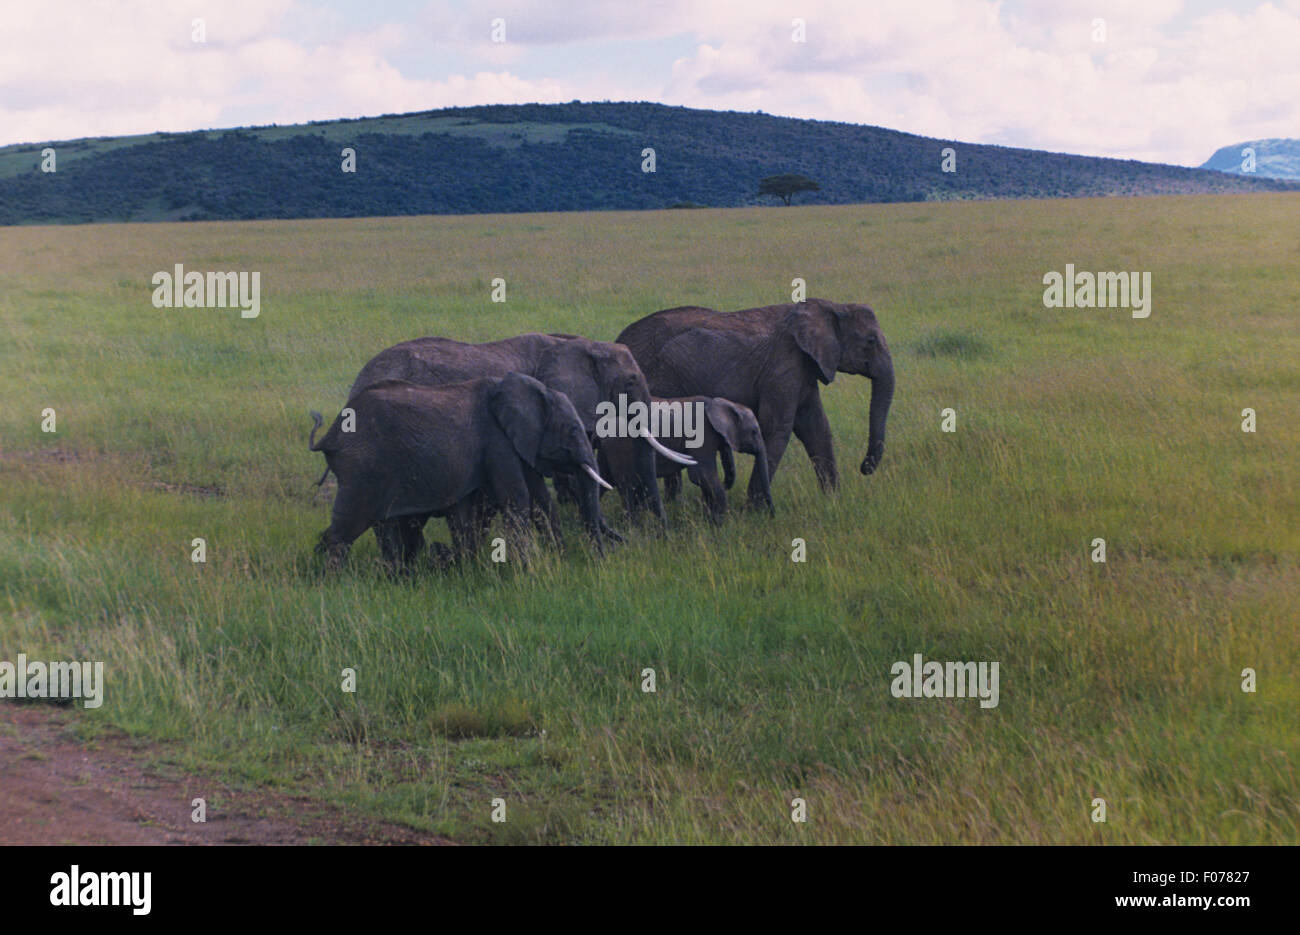 African Elephant group walking to right together across open grassland with hill in background Stock Photo